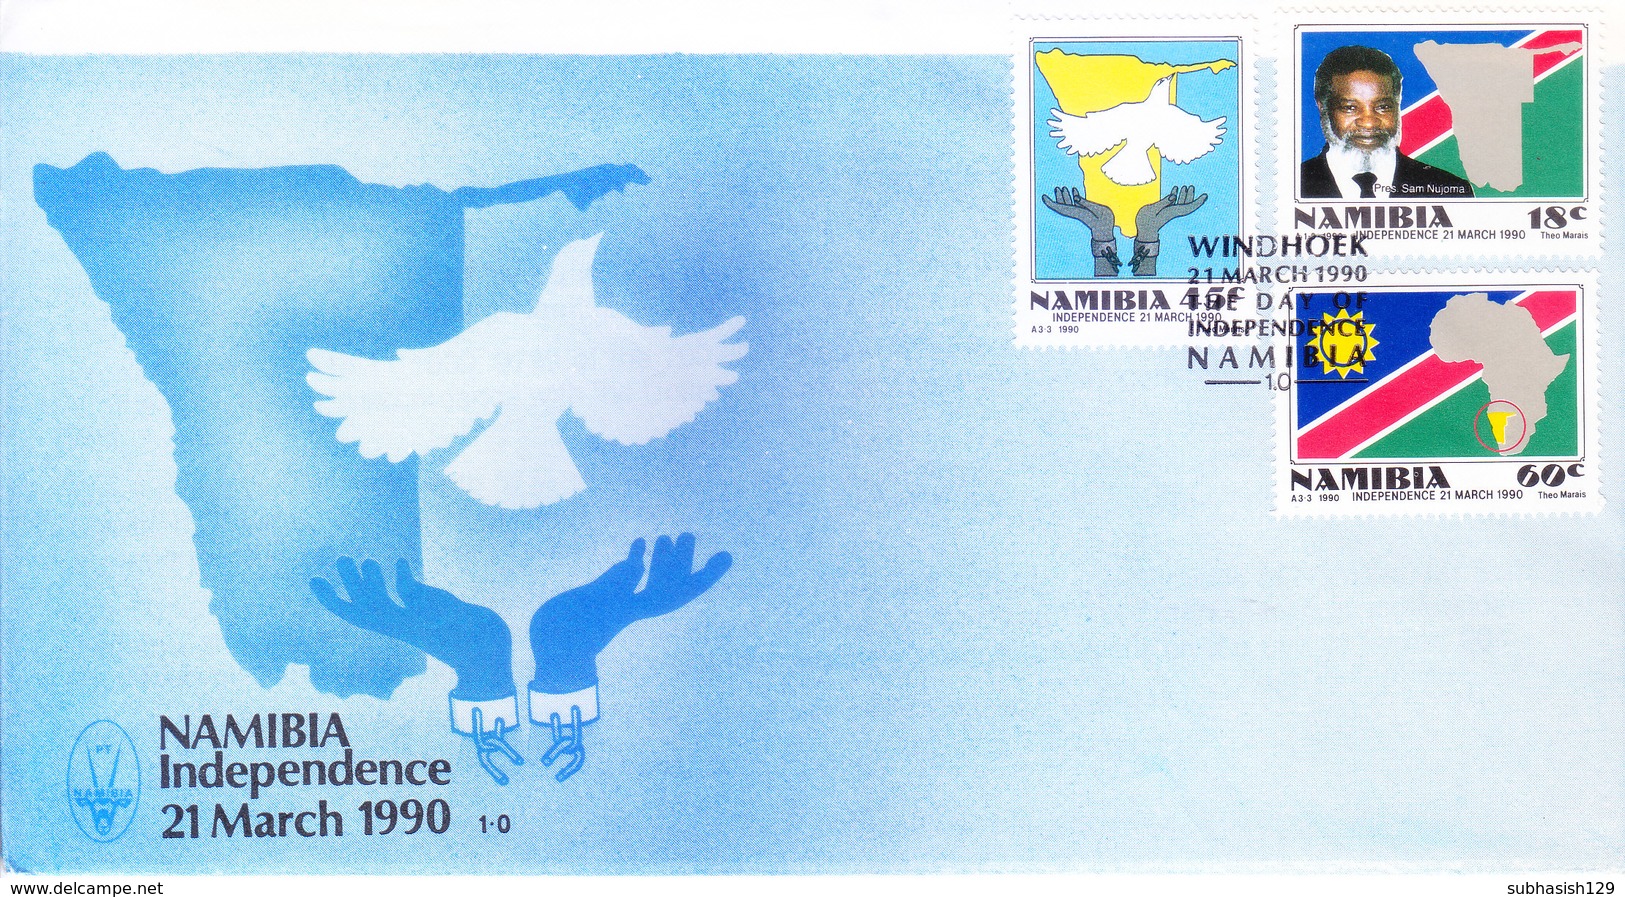 NAMIBIA : FIRST DAY COVER : NAMIBIA INDEPENDENCE - 21-03-1990, SET OF 3 - Namibia (1990- ...)